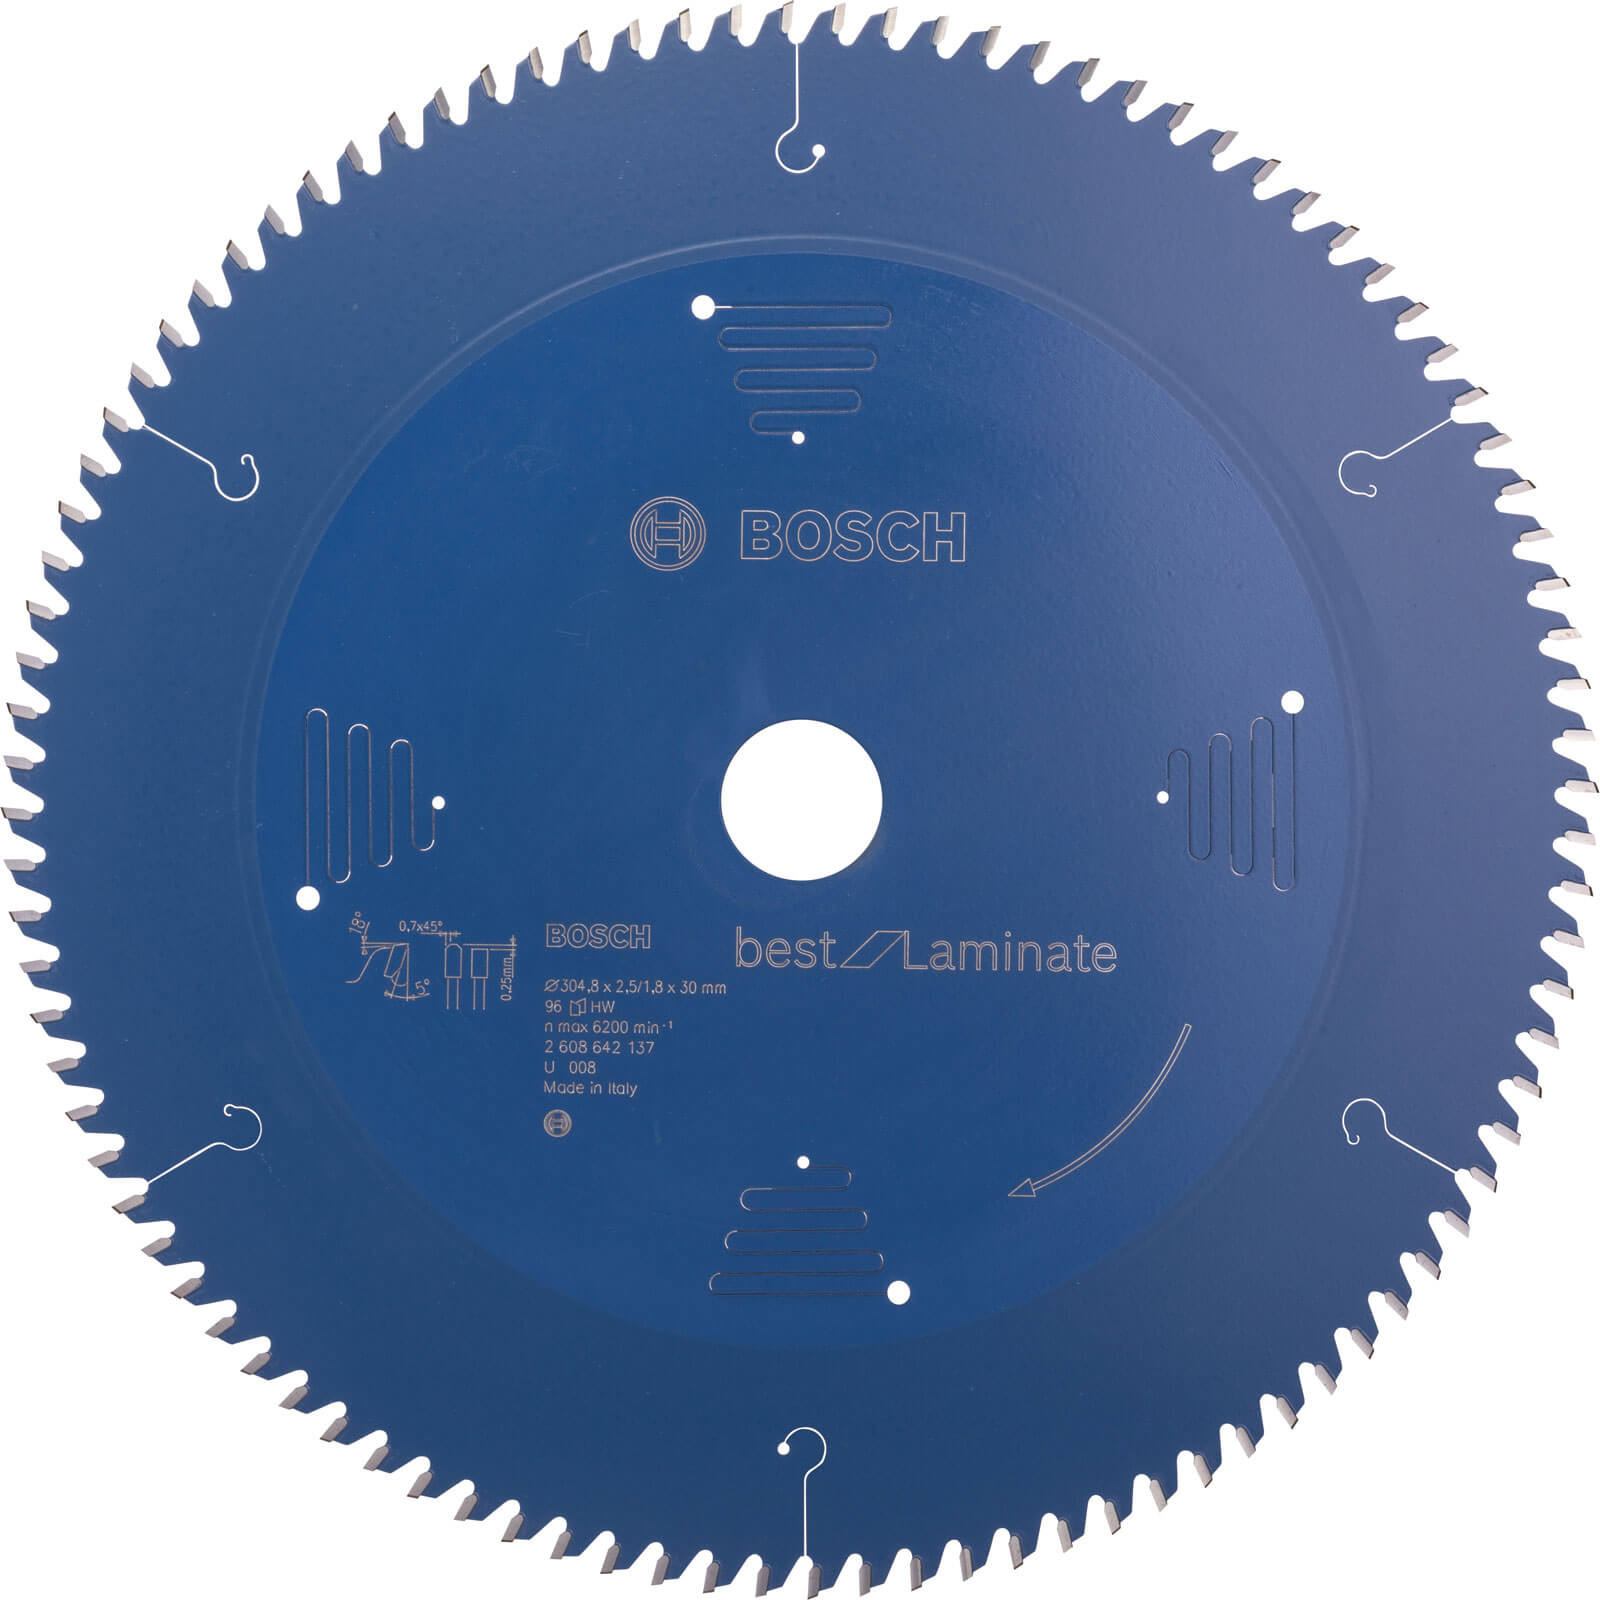 Image of Bosch Best Laminate Cutting Mitre Saw Blade 305mm 96T 30mm